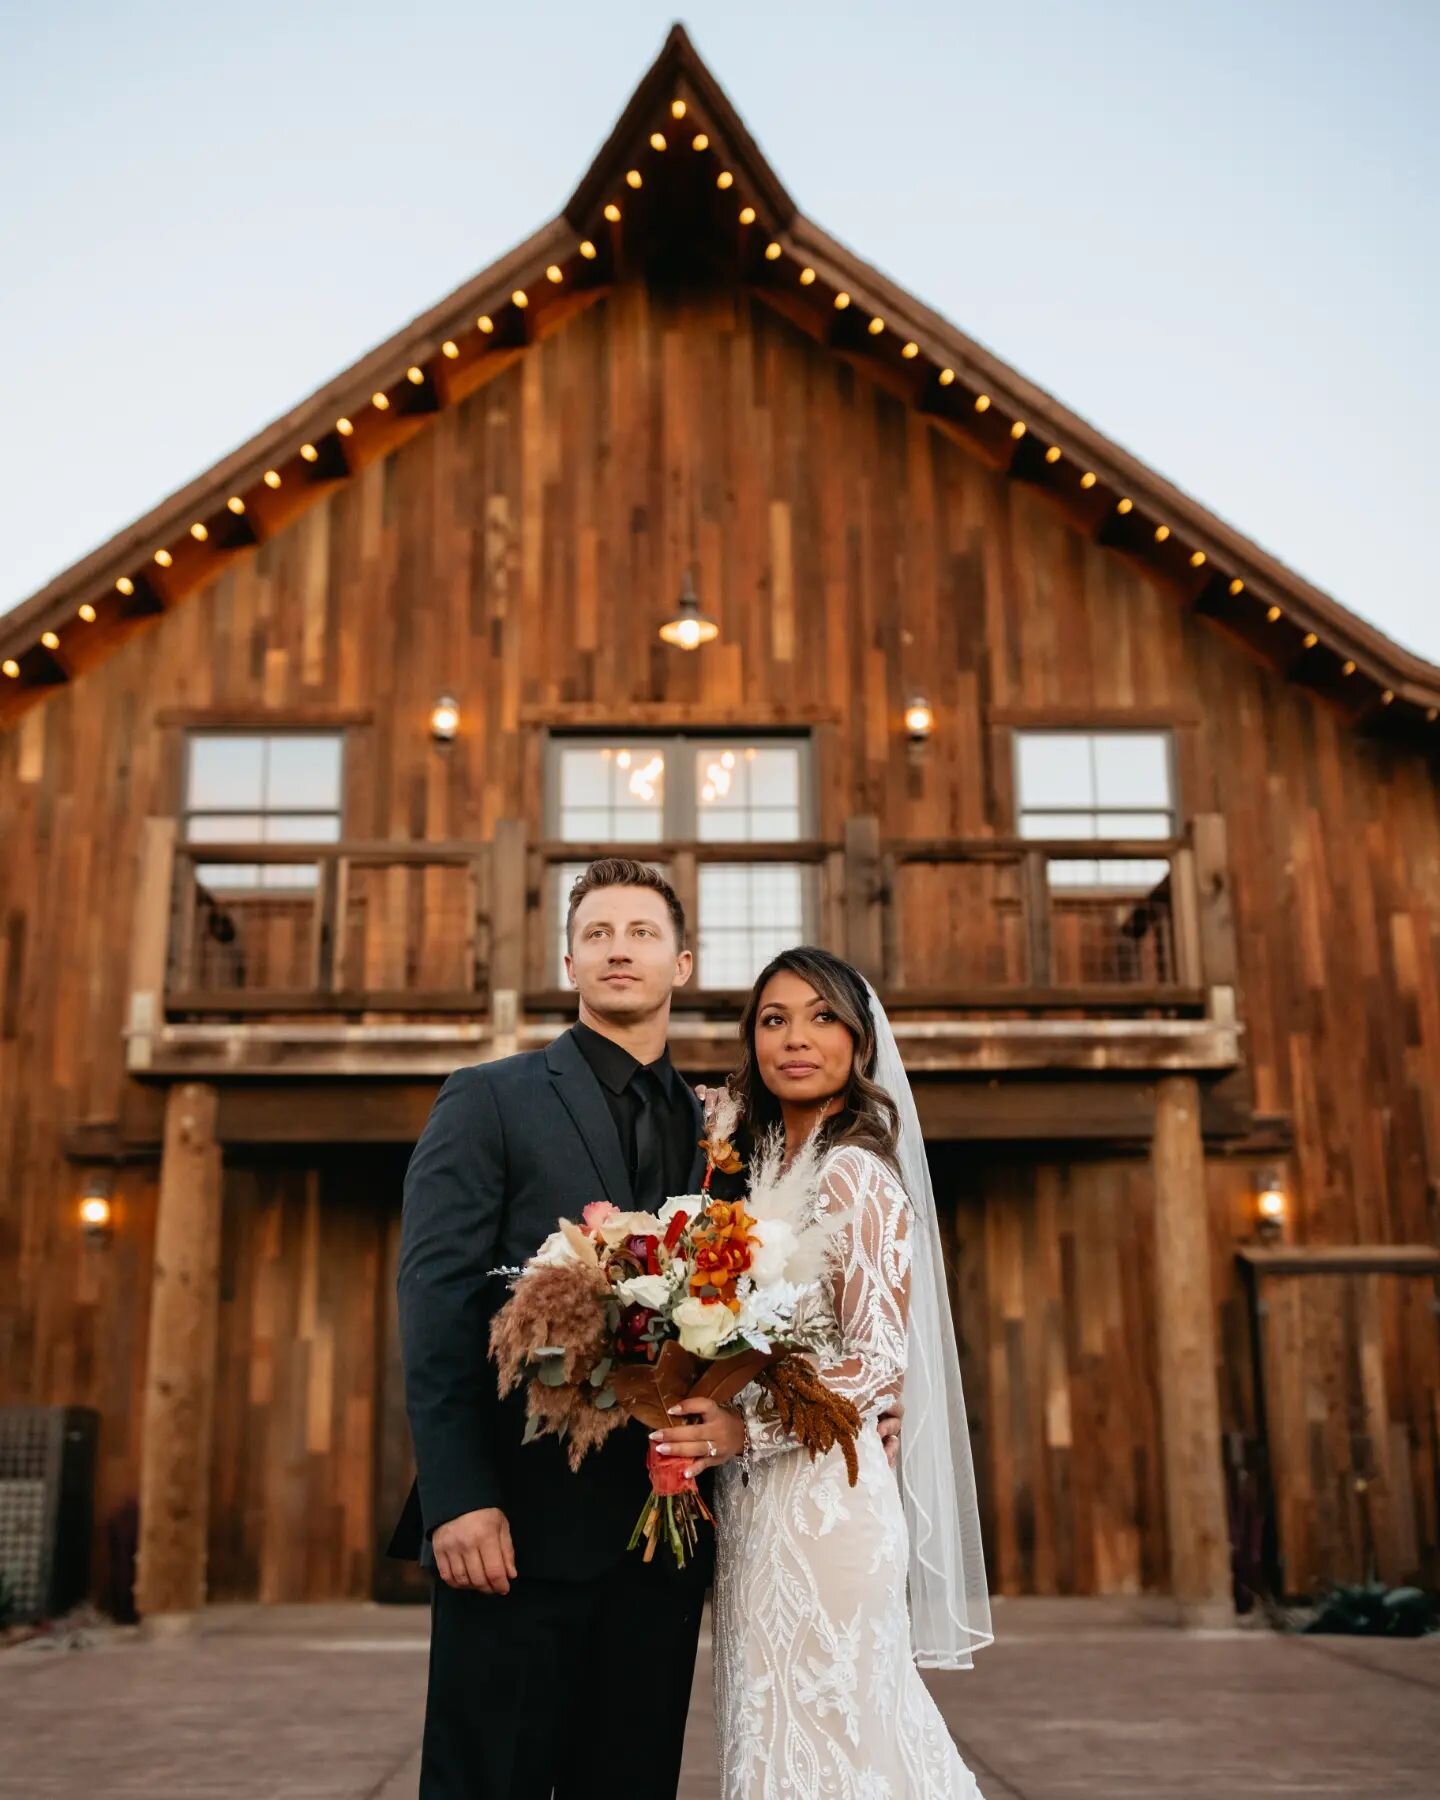 Congratulations to Aaron &amp; Sophia! 11. 12. 22
We are so excited to send off their wedding gallery today, just a stunning venue. We're on an editing roll. Hoping to finalize and send off all wedding galleries before the new year! 
Have a blessed w